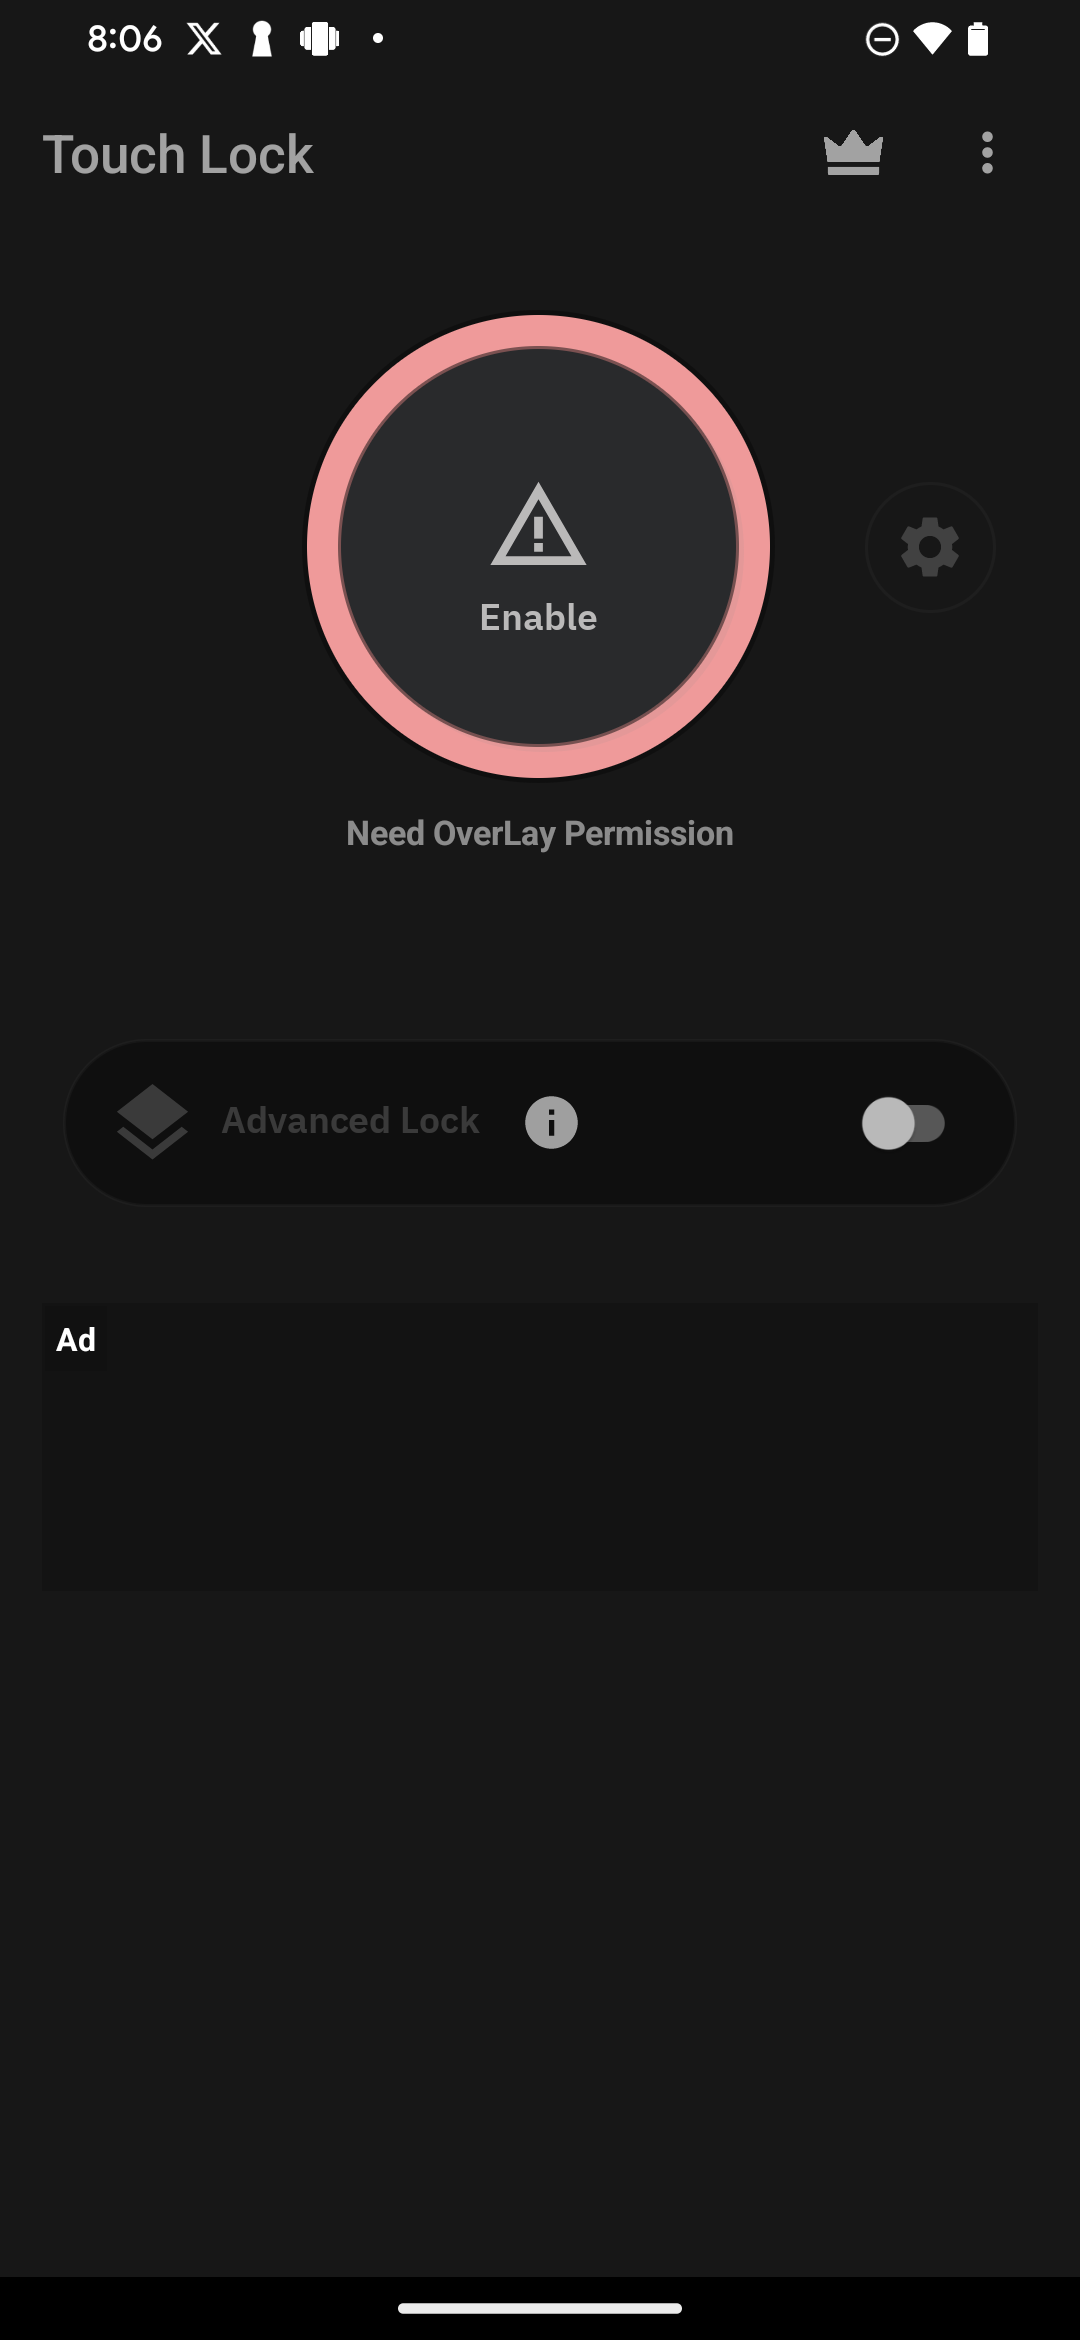 Touch Lock home page requesting for the required permissions